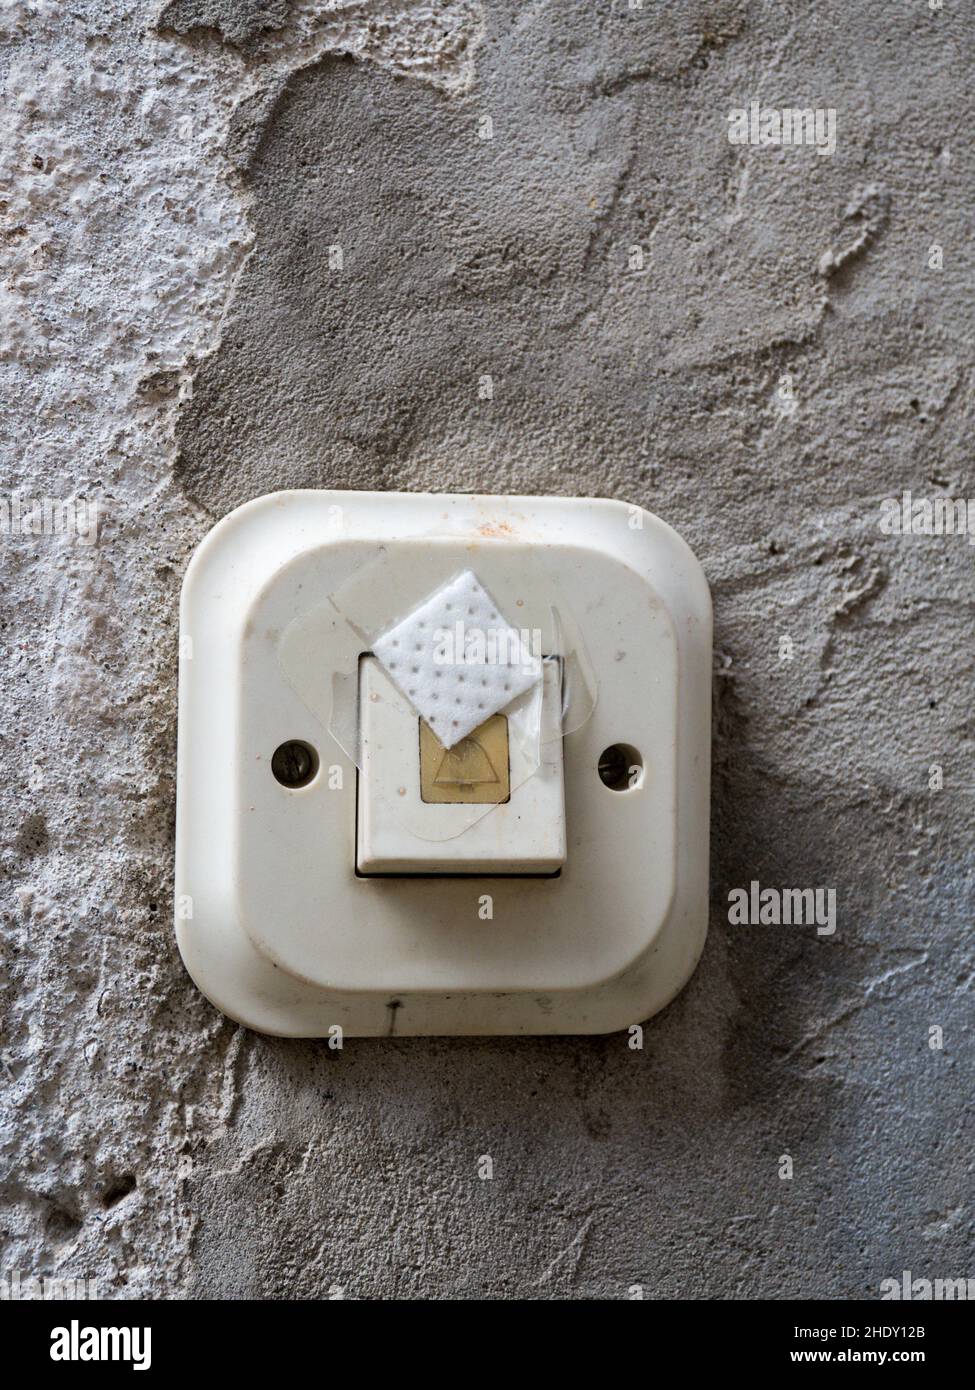 An old bell switch was protected from unauthorized use with adhesive plaster. Stock Photo